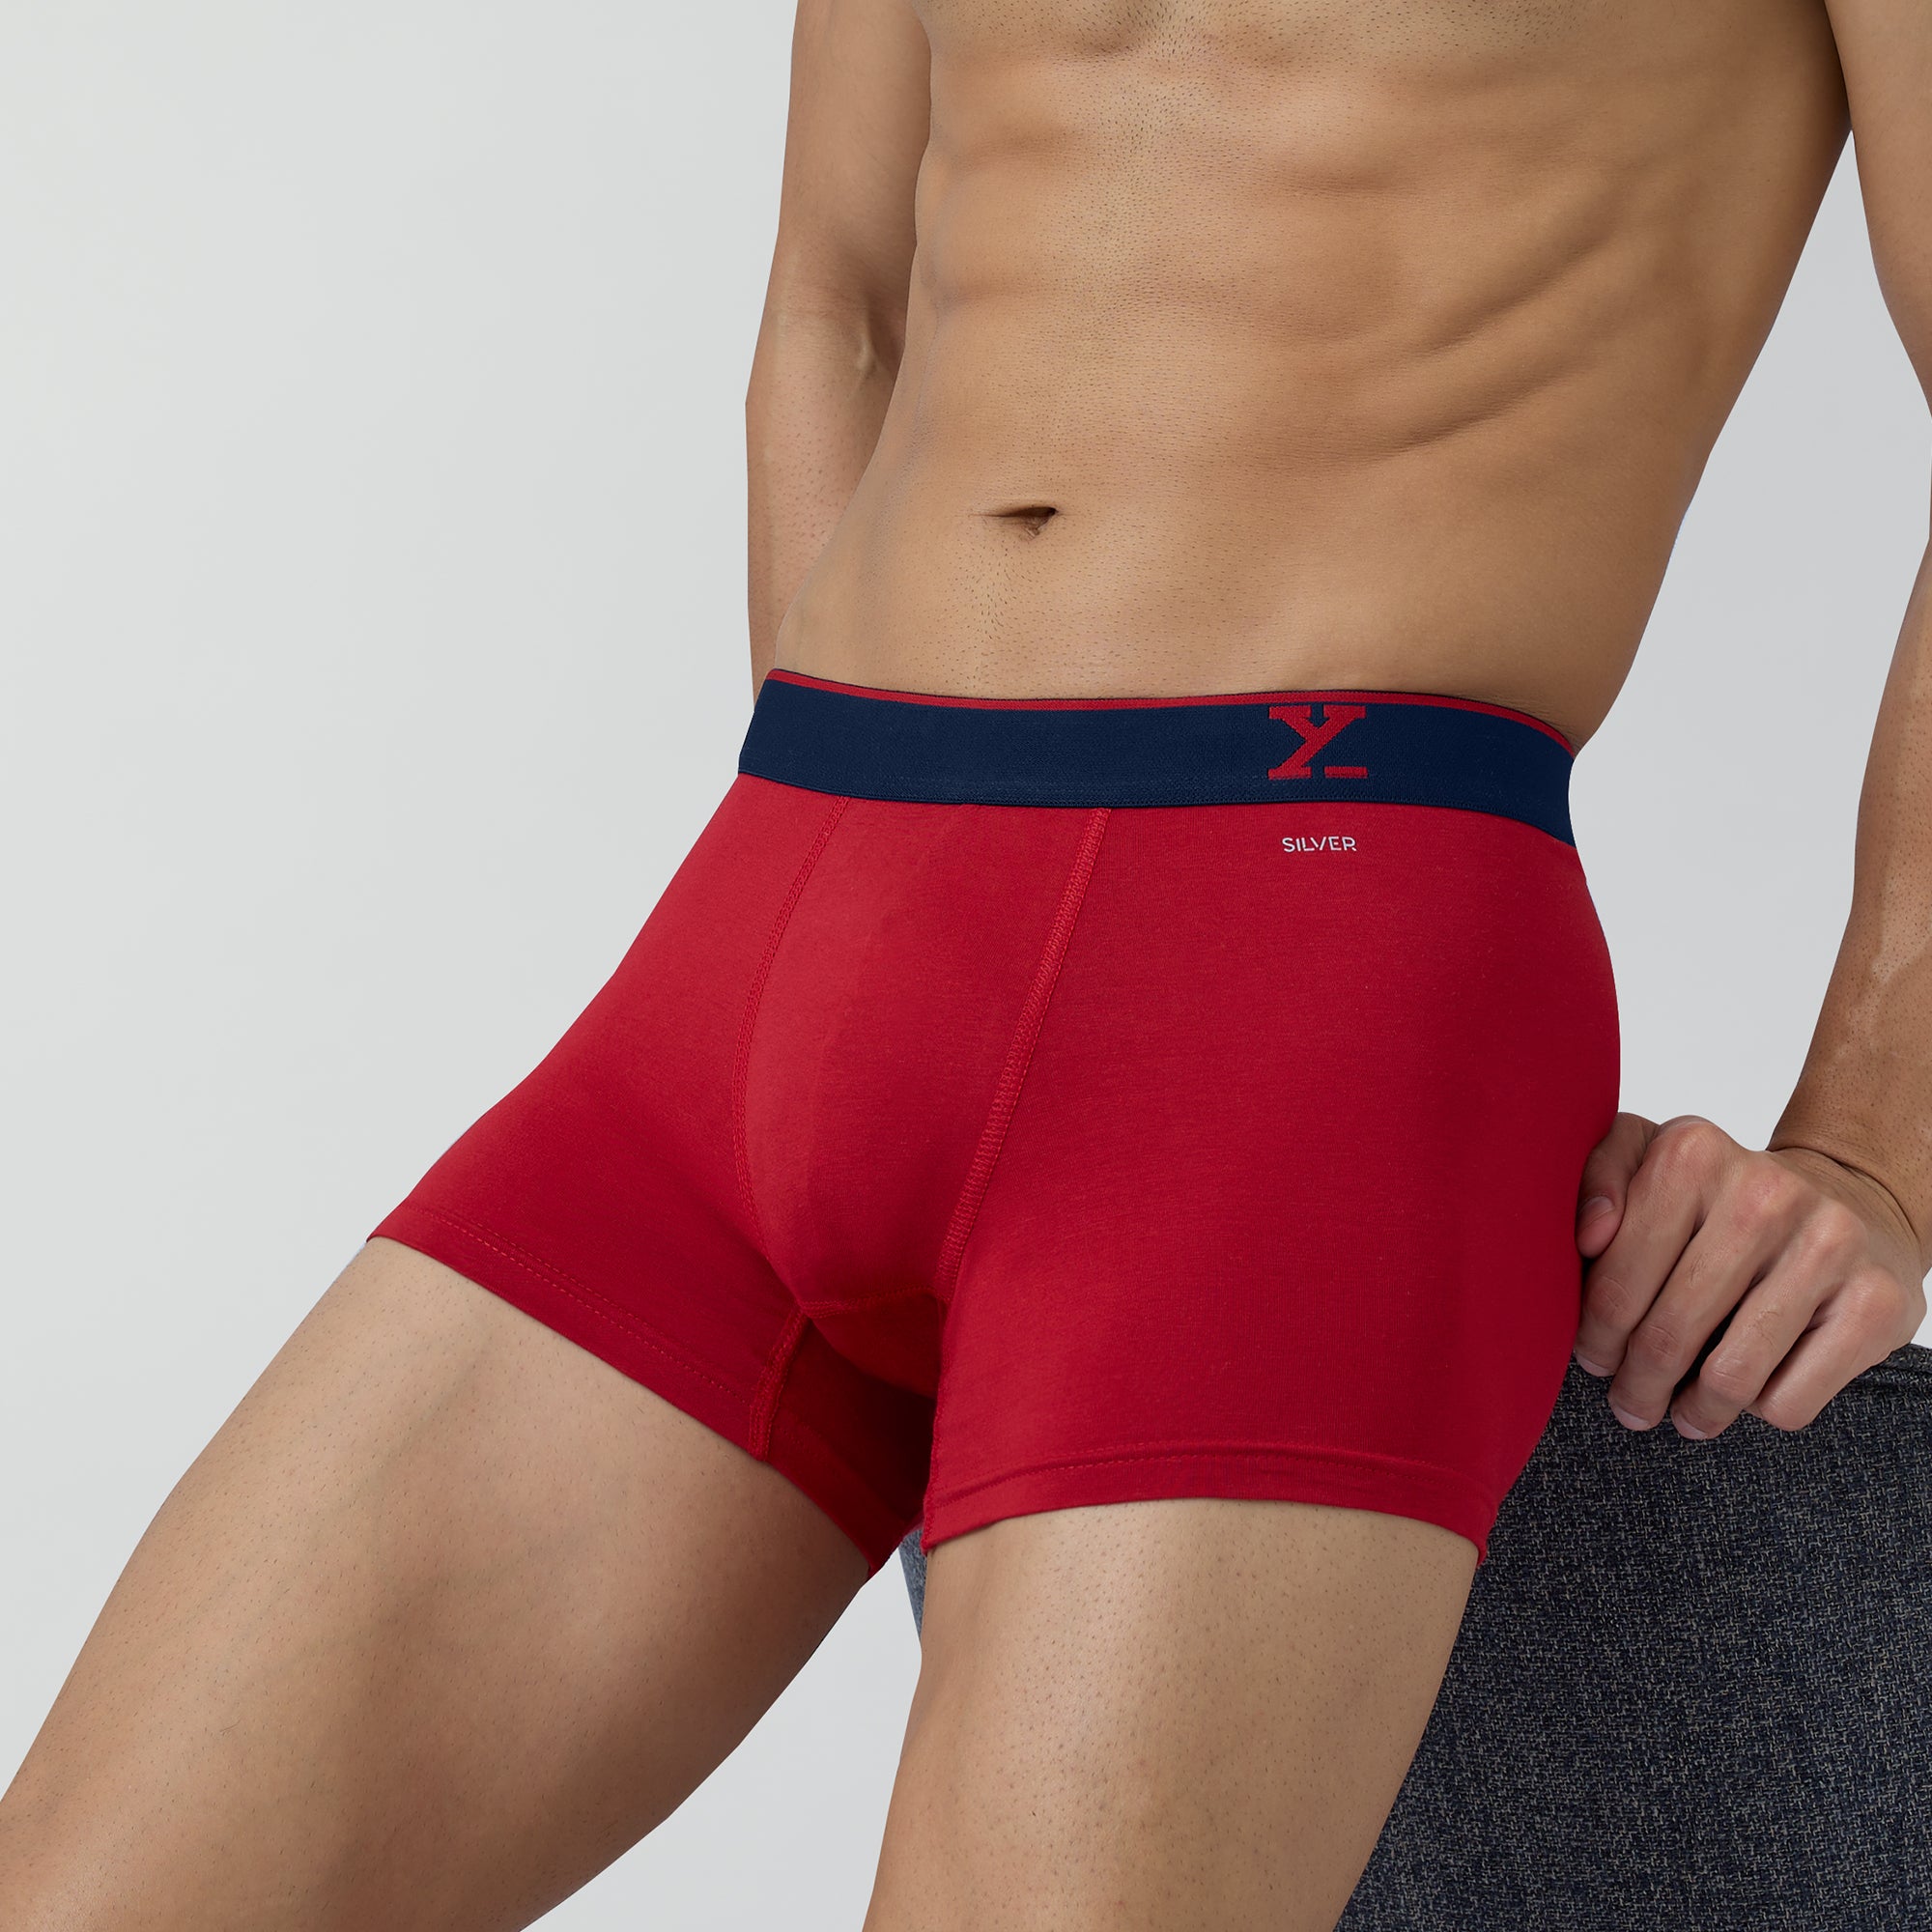 Why do guys like to show the elastic band on their underwear? - Quora